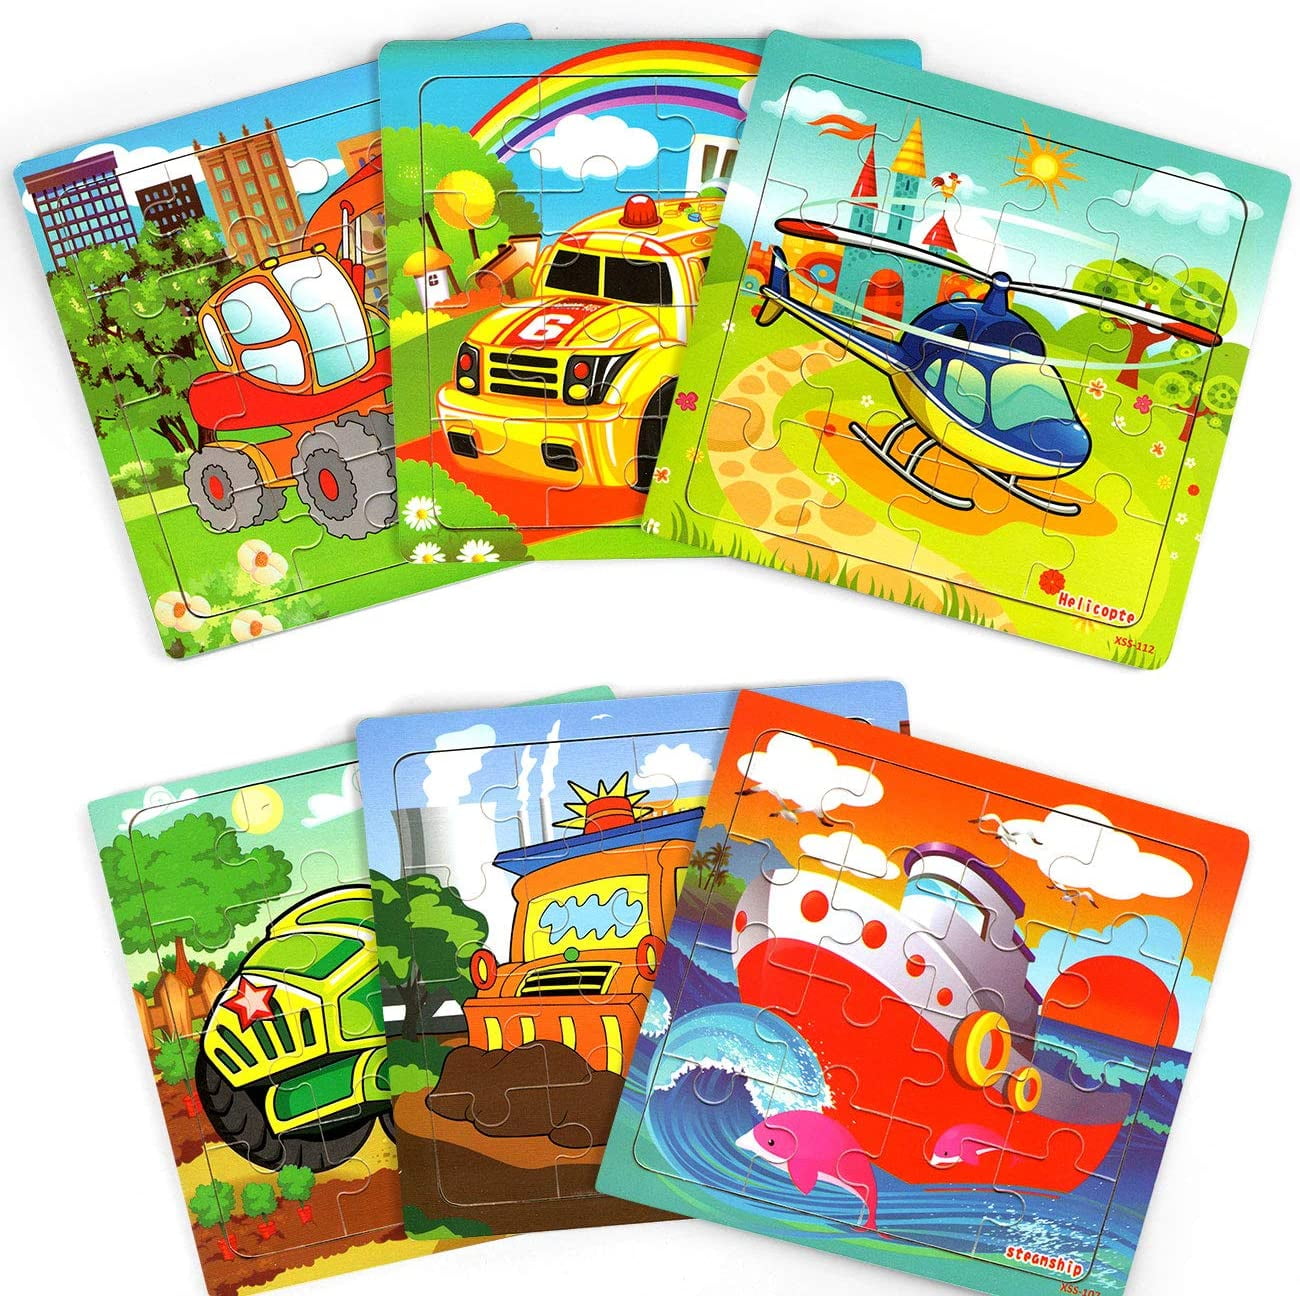 Disney Cars 20 Pcs Wooden Toys Jigsaw Puzzles Gifts for Kids With Behind Image 